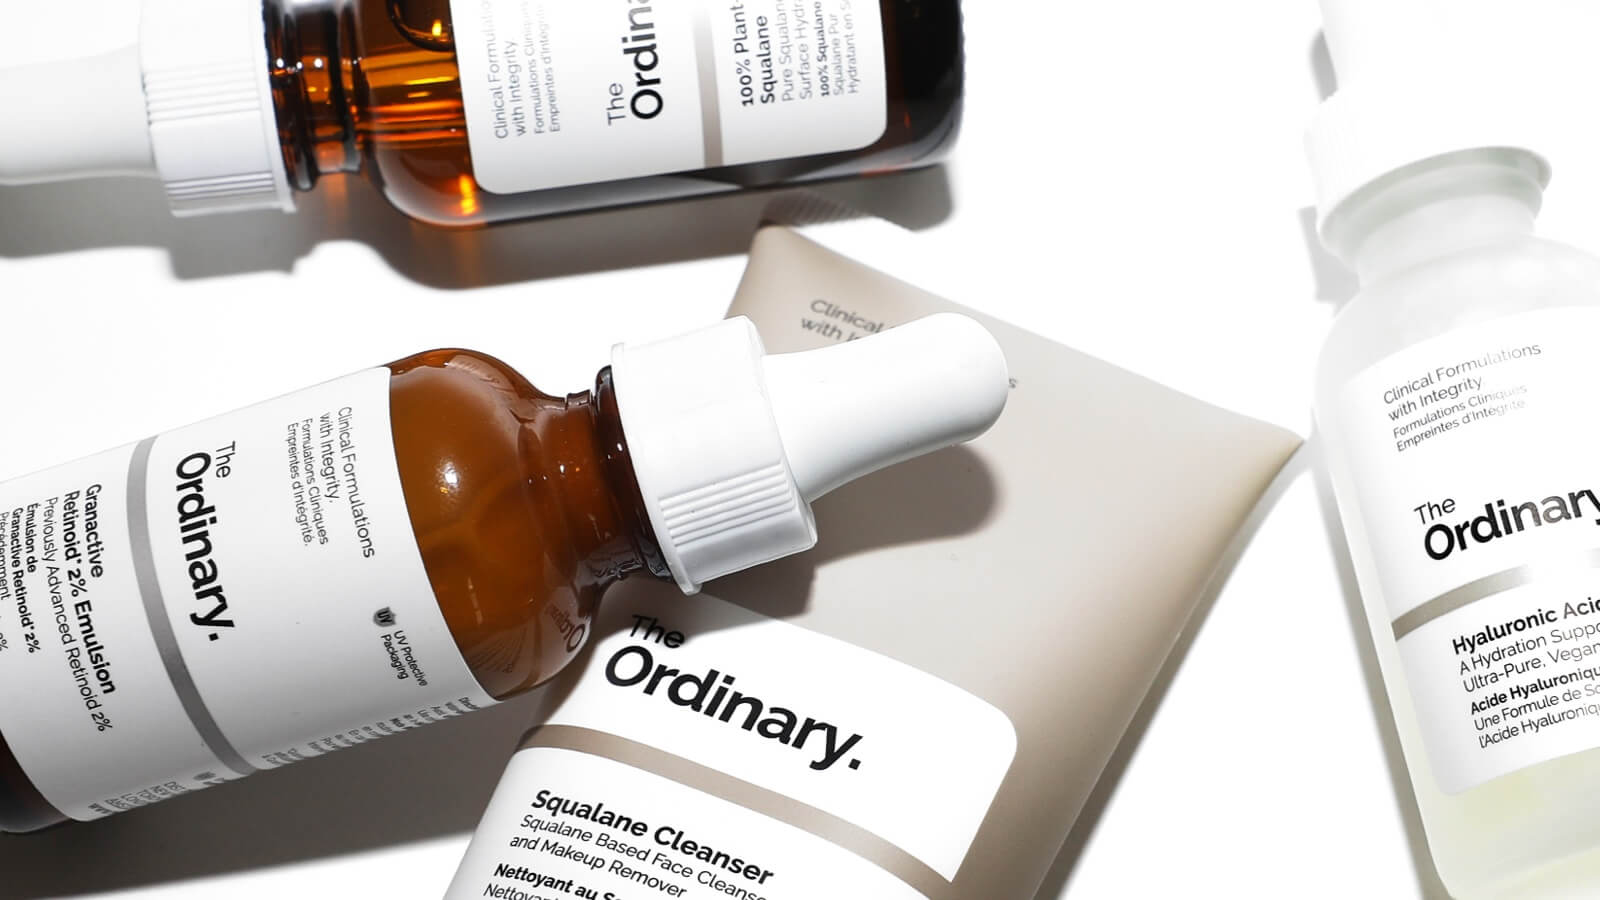 How To Build A Skincare Routine With The Ordinary Products - Beauty Bay  Edited